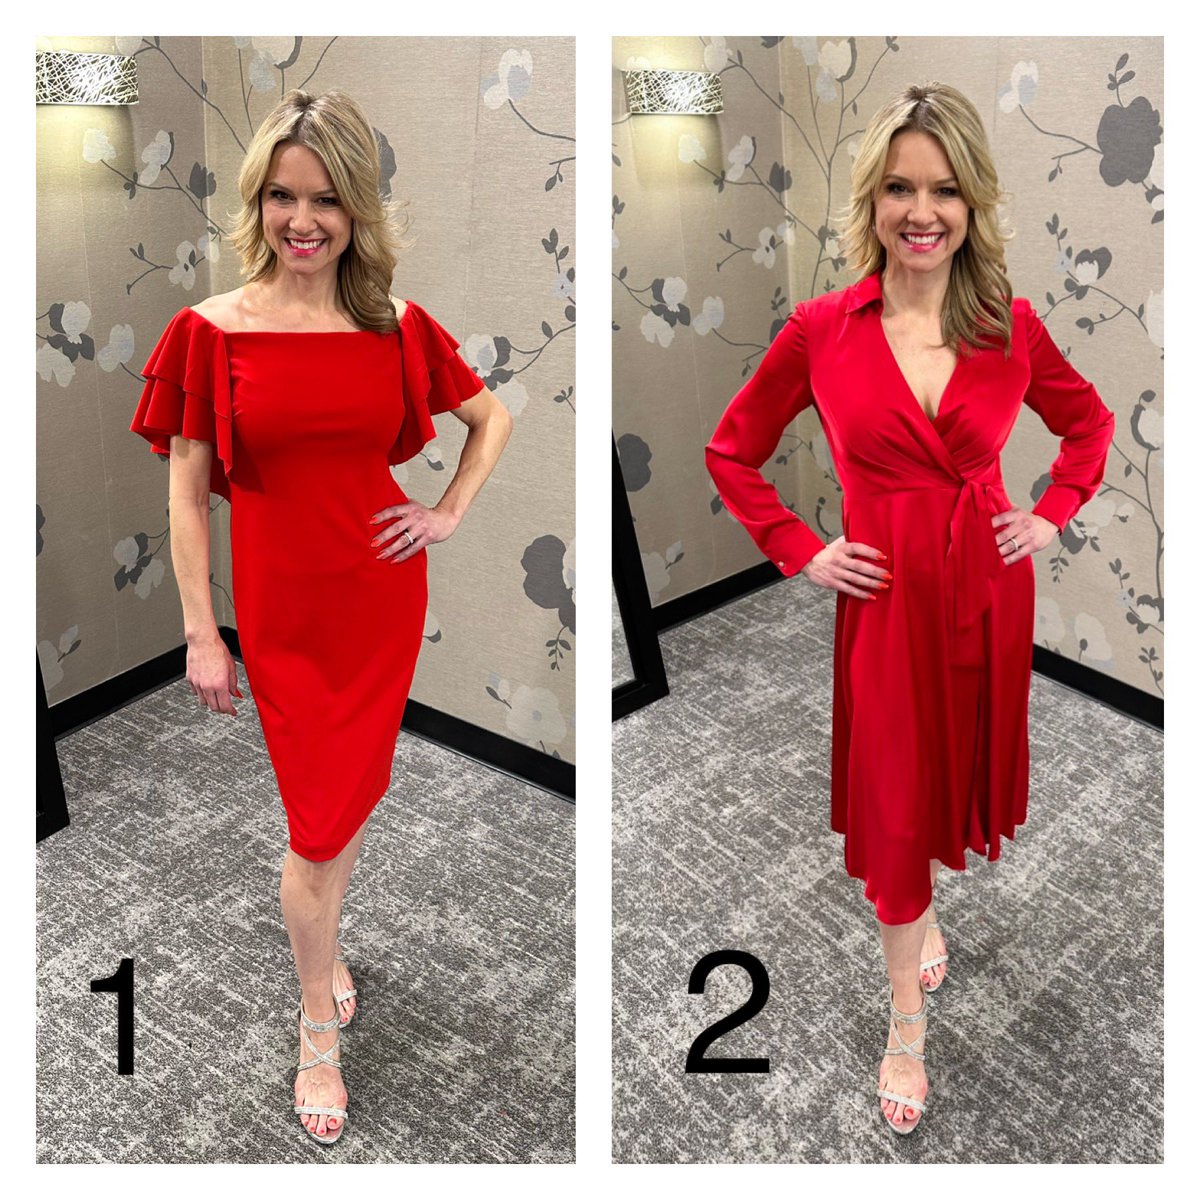 Help me choose a dress! Hosting Go Red for Women today for the @ahanevada ❤️ Which dress should I wear? 💃 1 or 2?